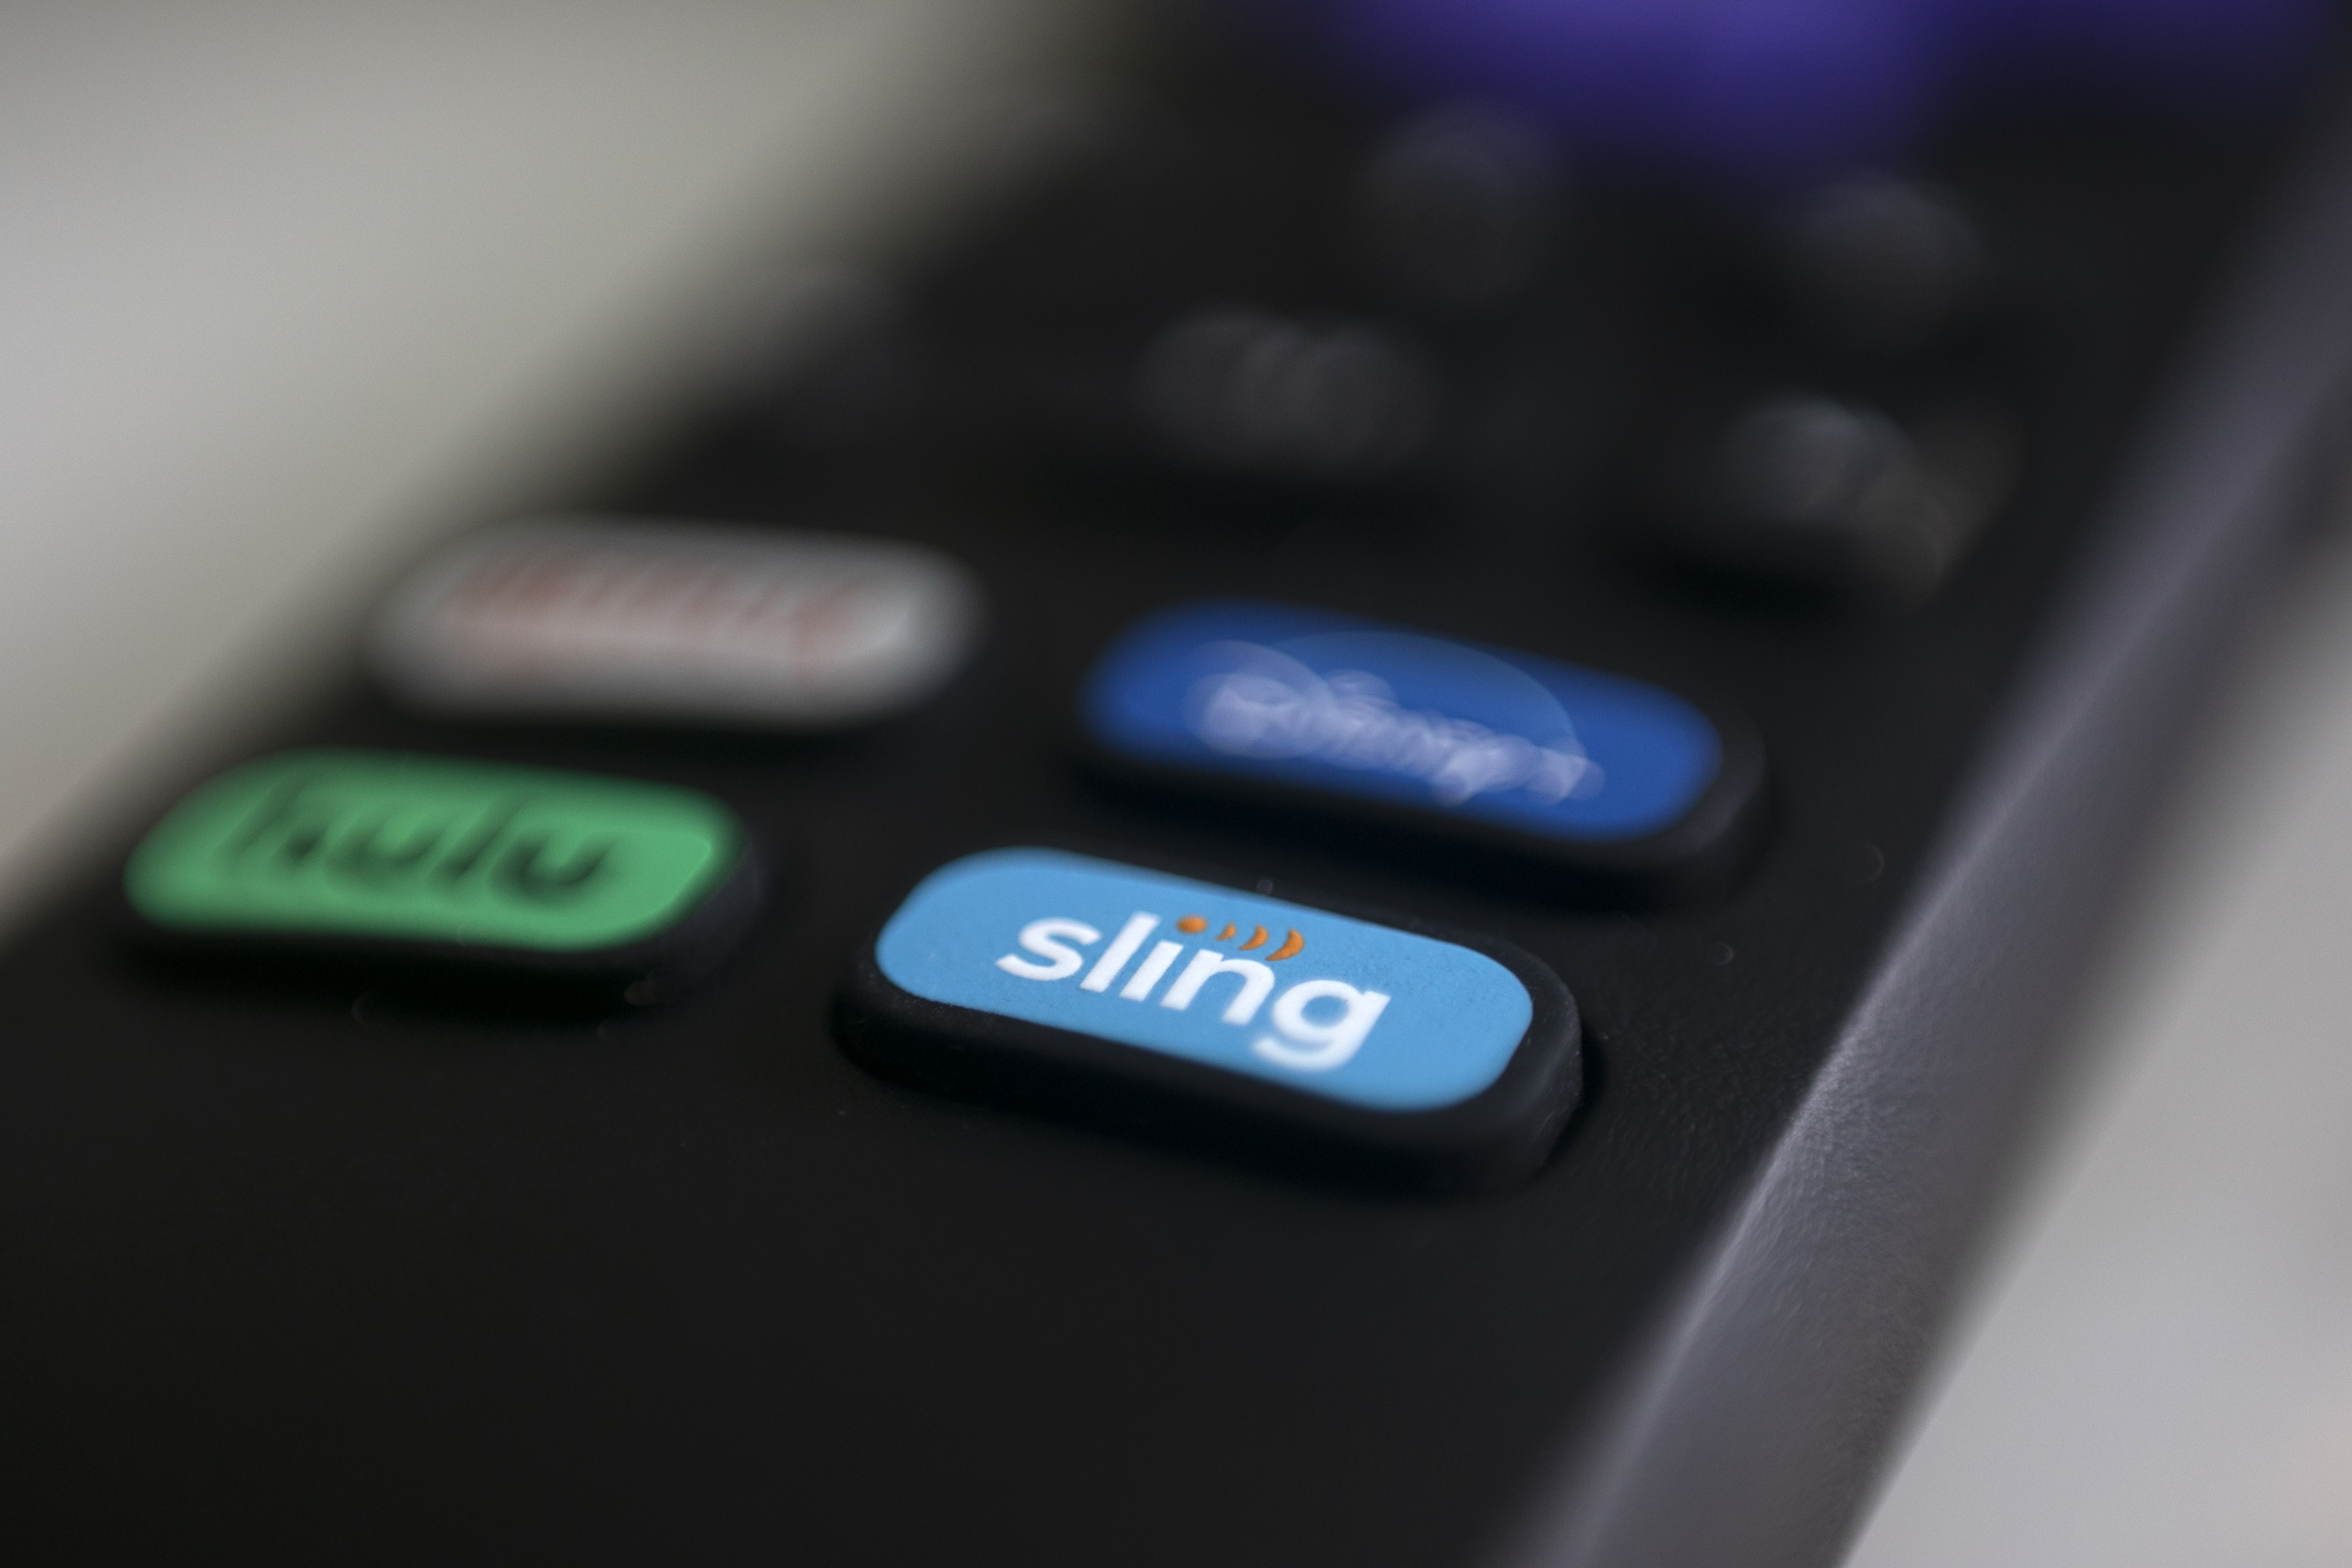 Best Sling Package for Football: Live Stream NFL With Sling TV